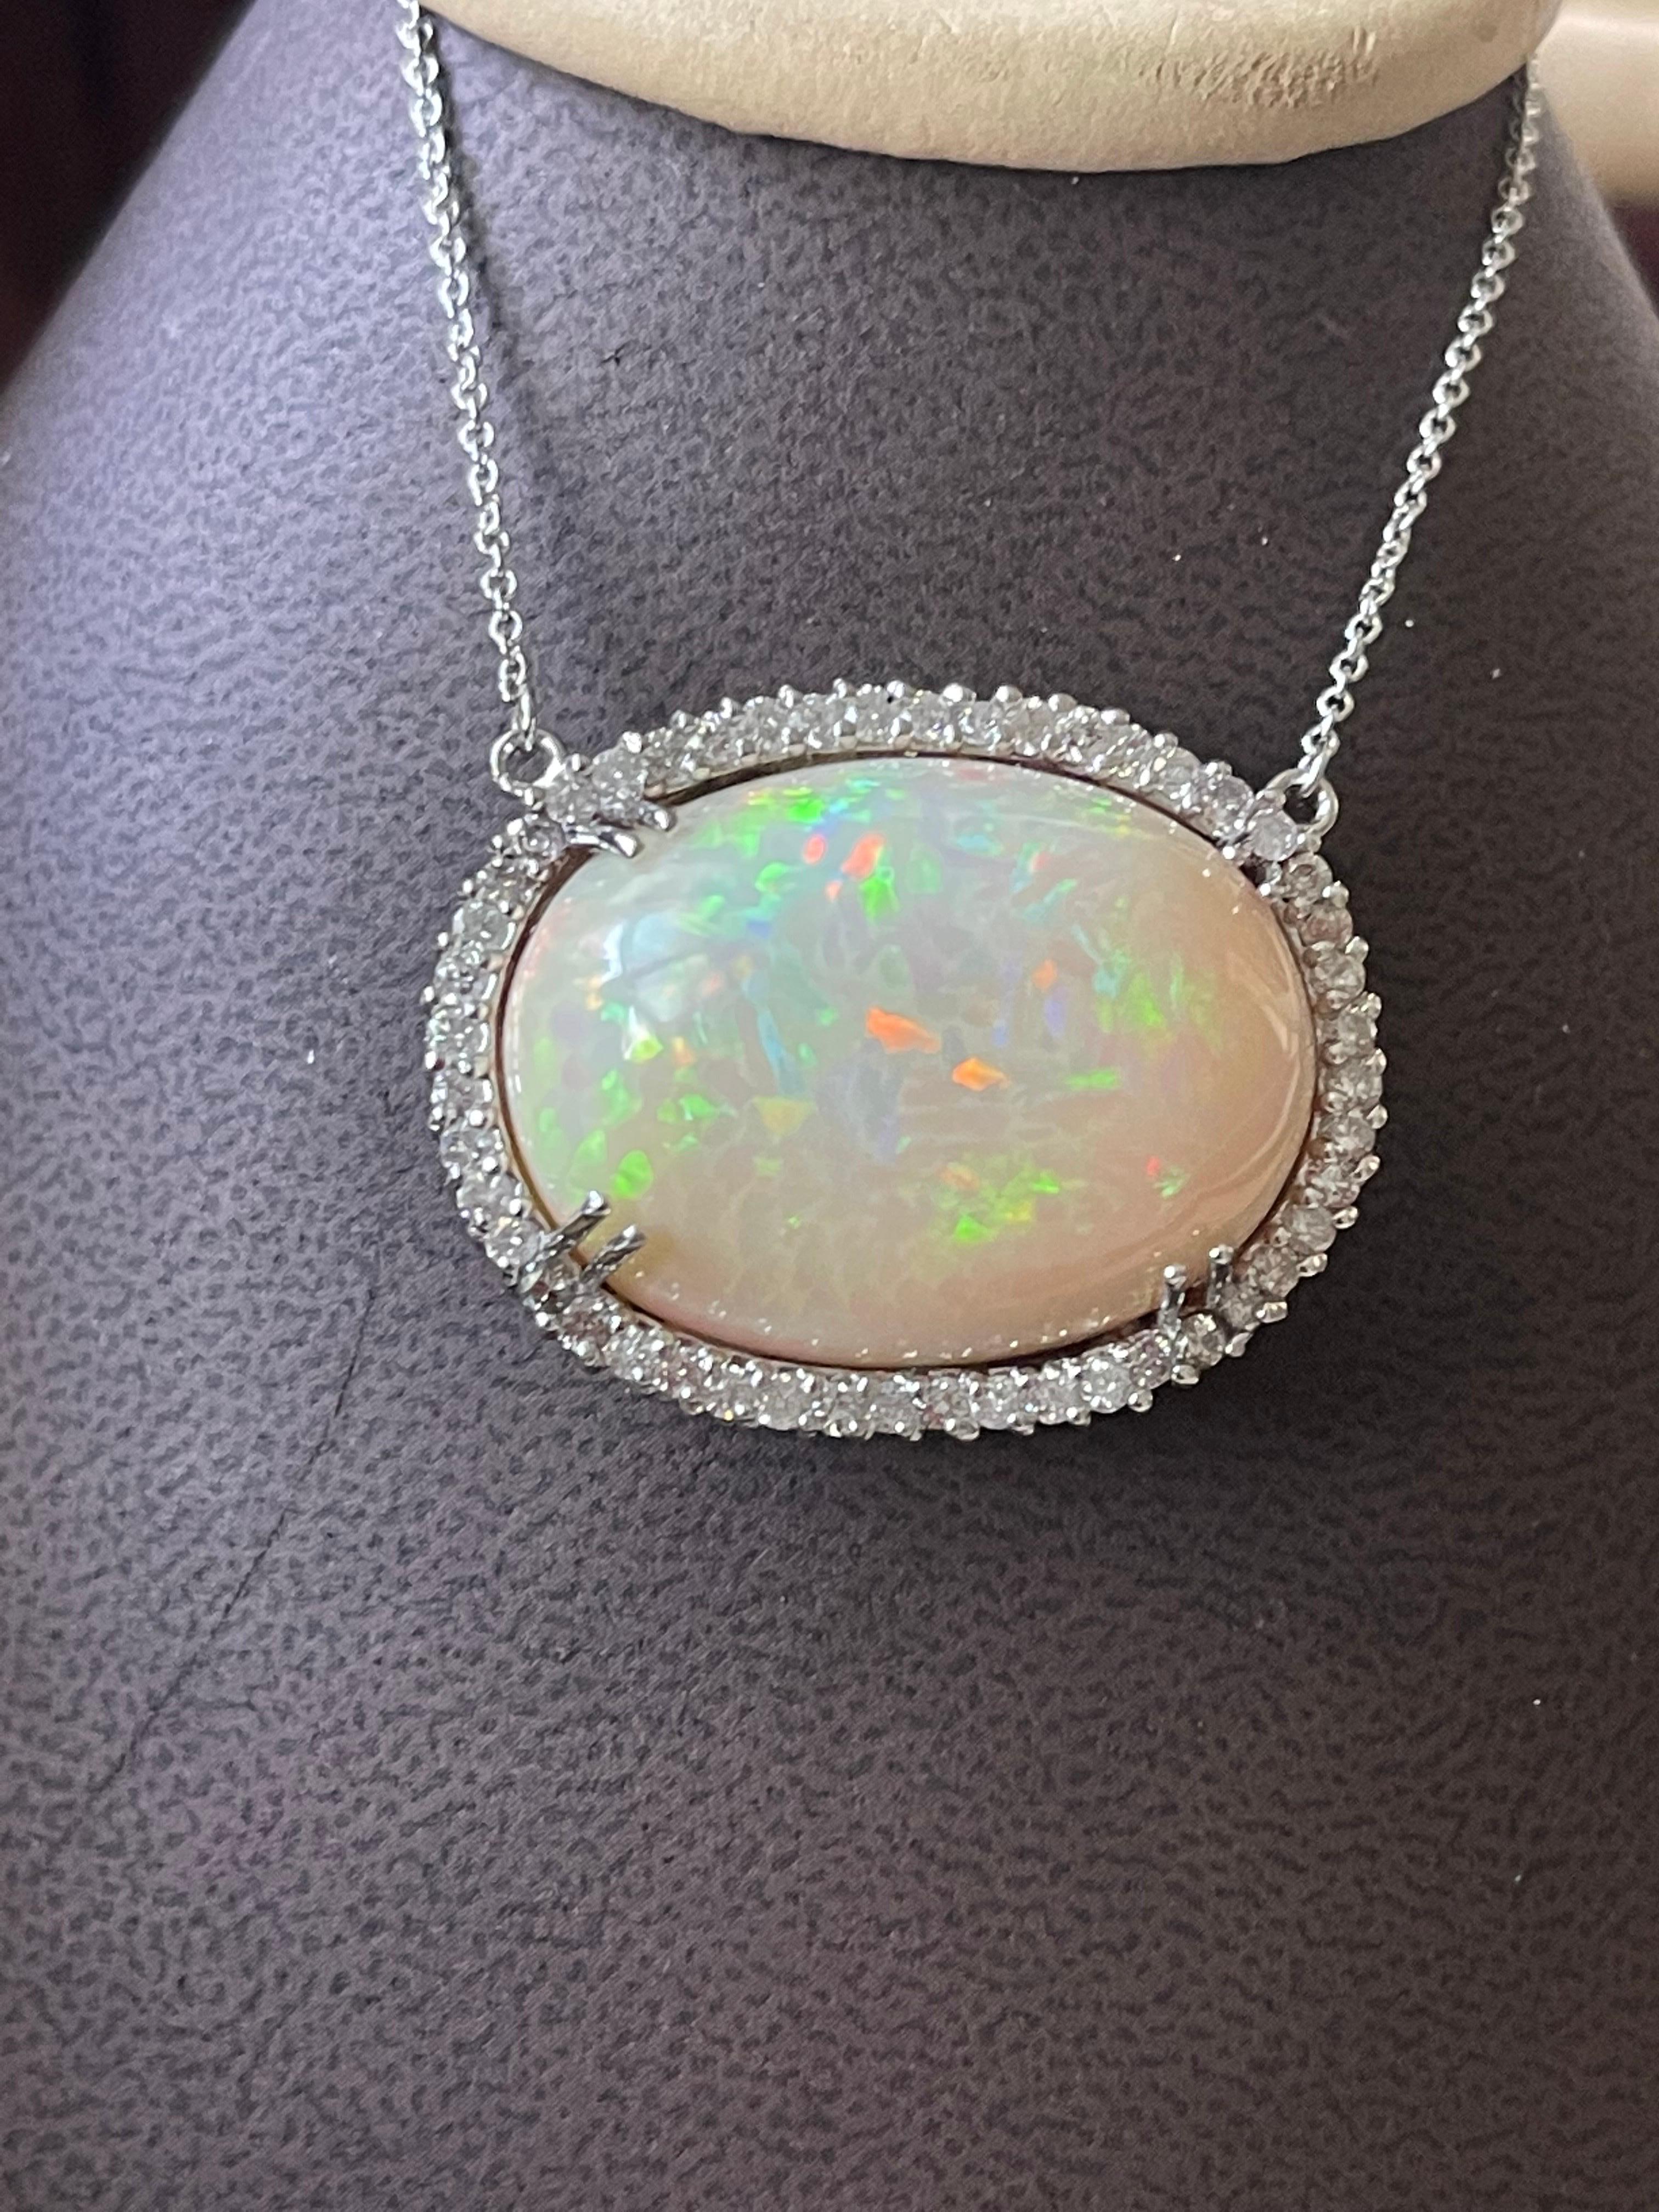 Approximately 42 Carat Oval Ethiopian Opal  & Diamond Pendant 14 Karat White Gold Necklace with Chain
This spectacular Pendant Necklace consisting of a single Oval Shape Ethiopian Opal Approximately 42 Carat. 
28 X20 MM size of opal
very clean Stone